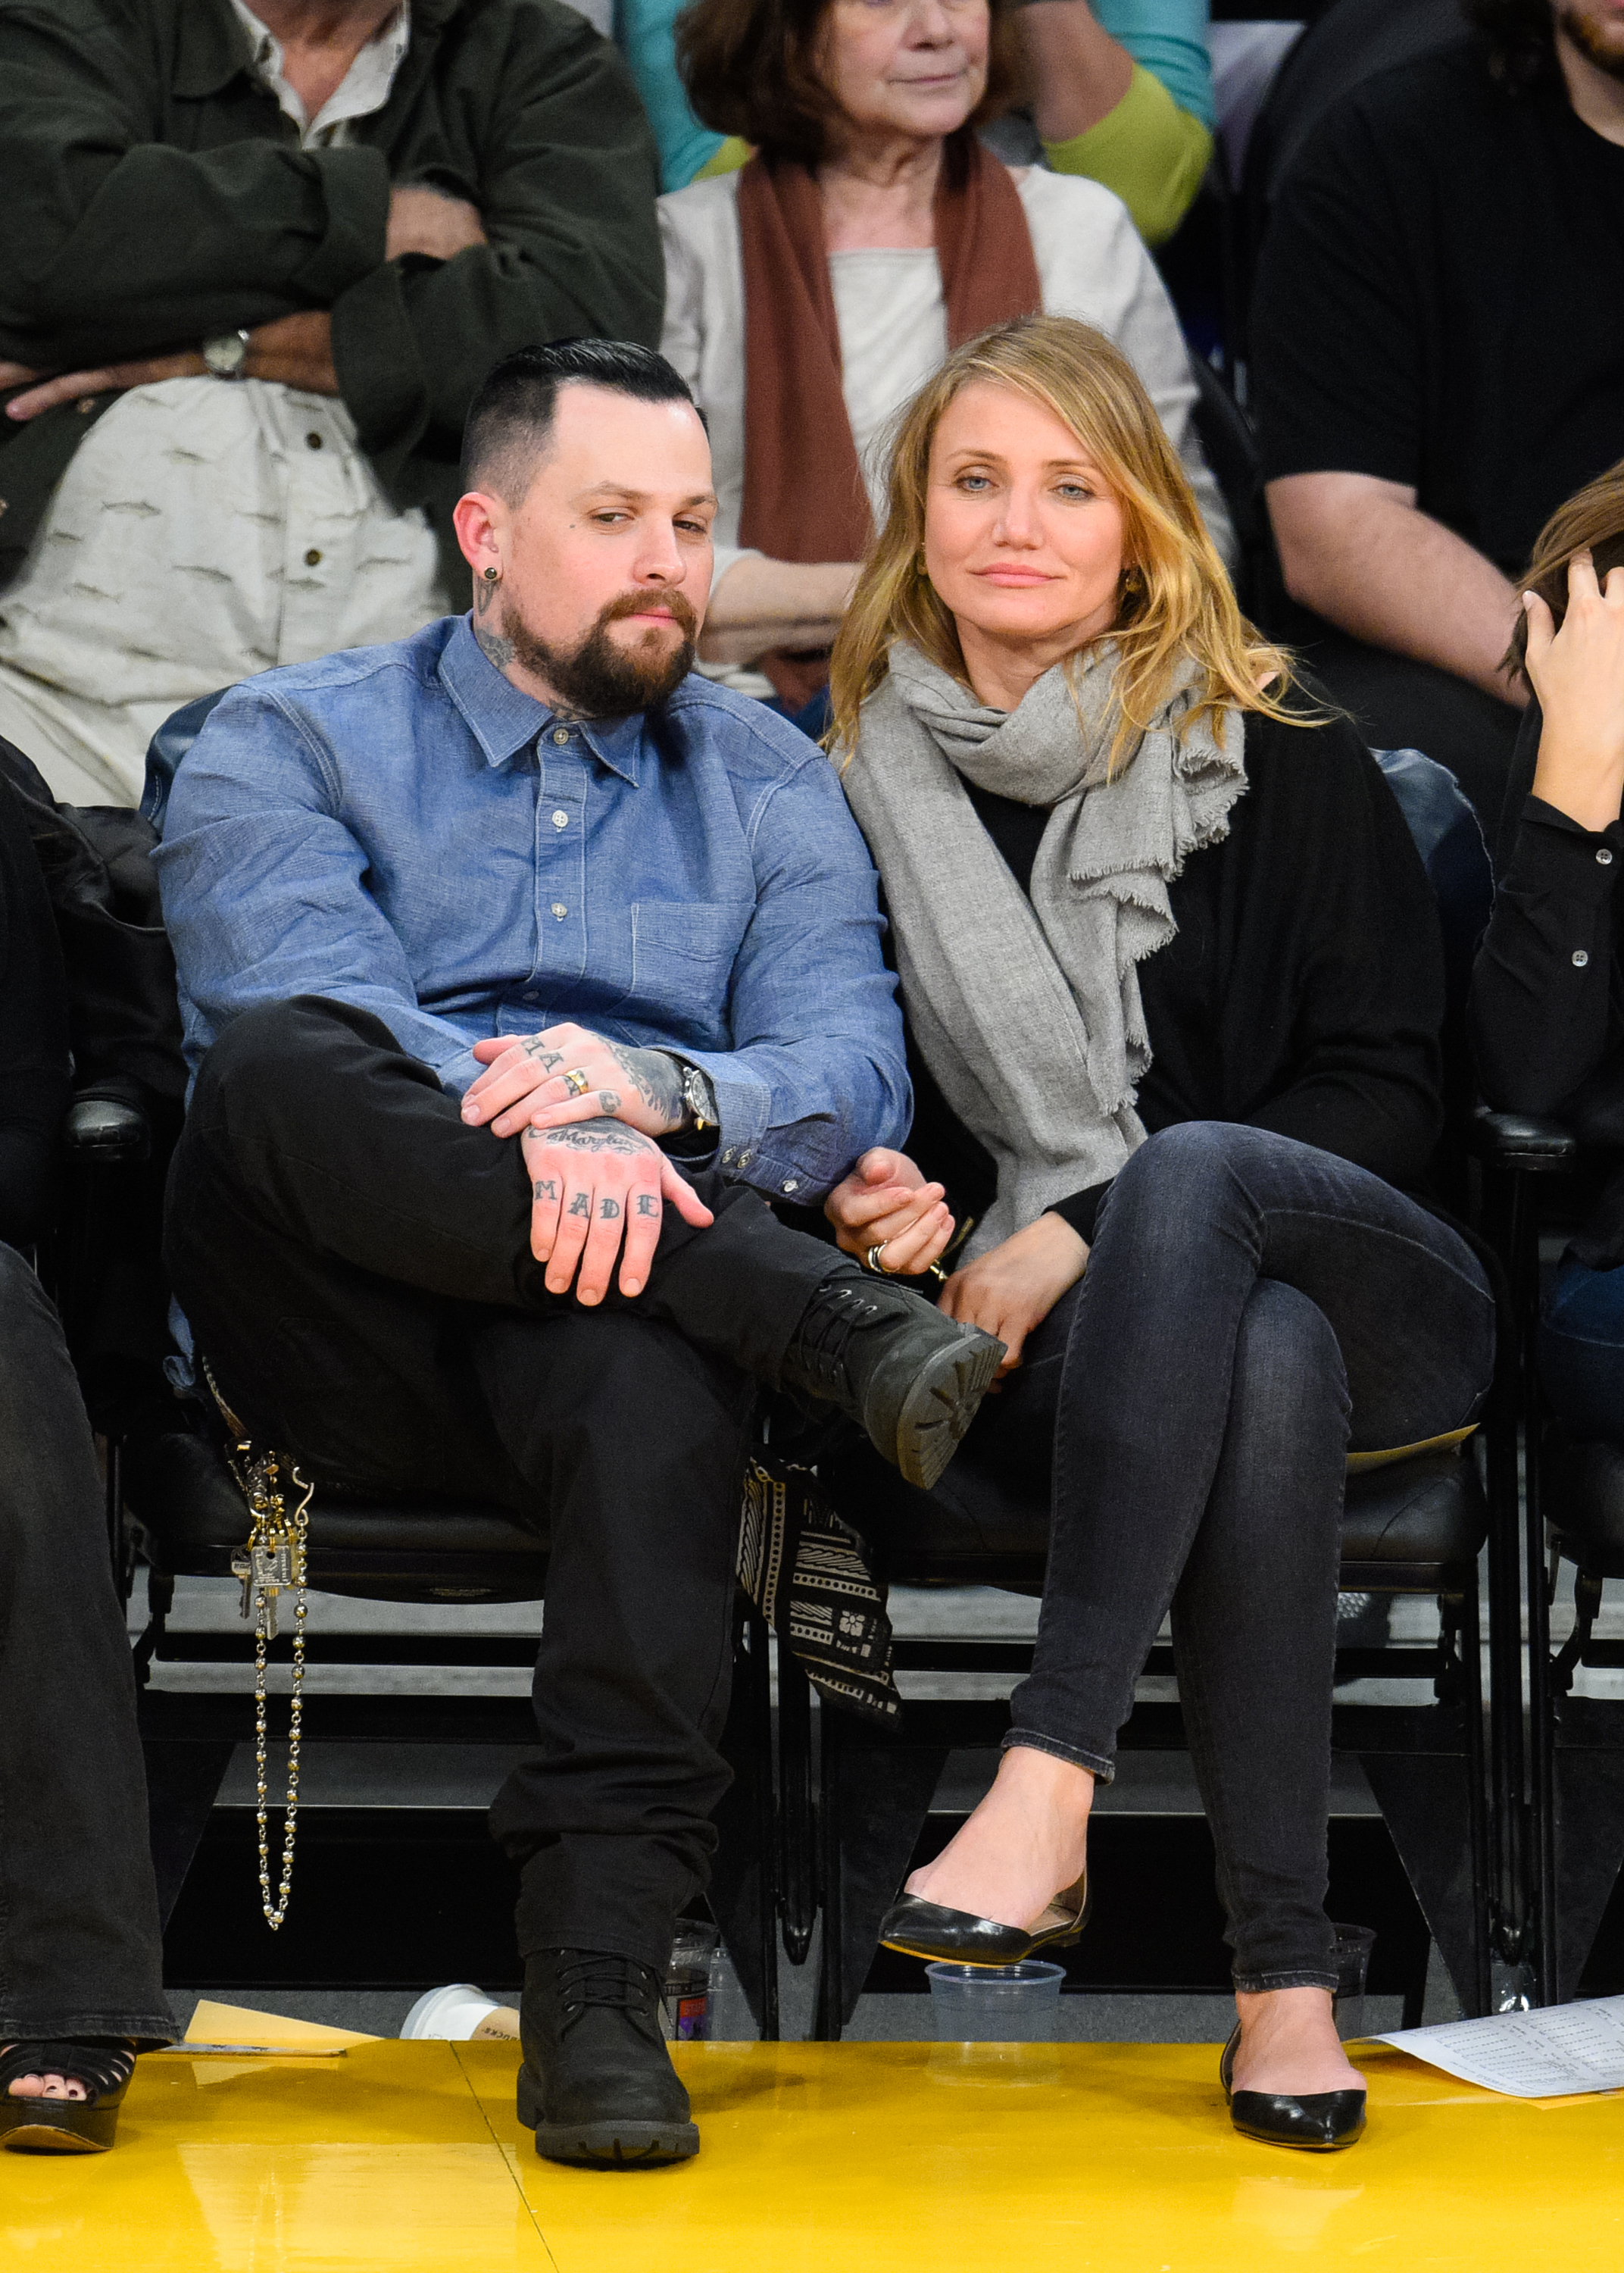 Benji Madden and Cameron Diaz at a basketball game between the Washington Wizards and the Los Angeles Lakers in Los Angeles, California on January 27, 2015 | Source: Getty Images